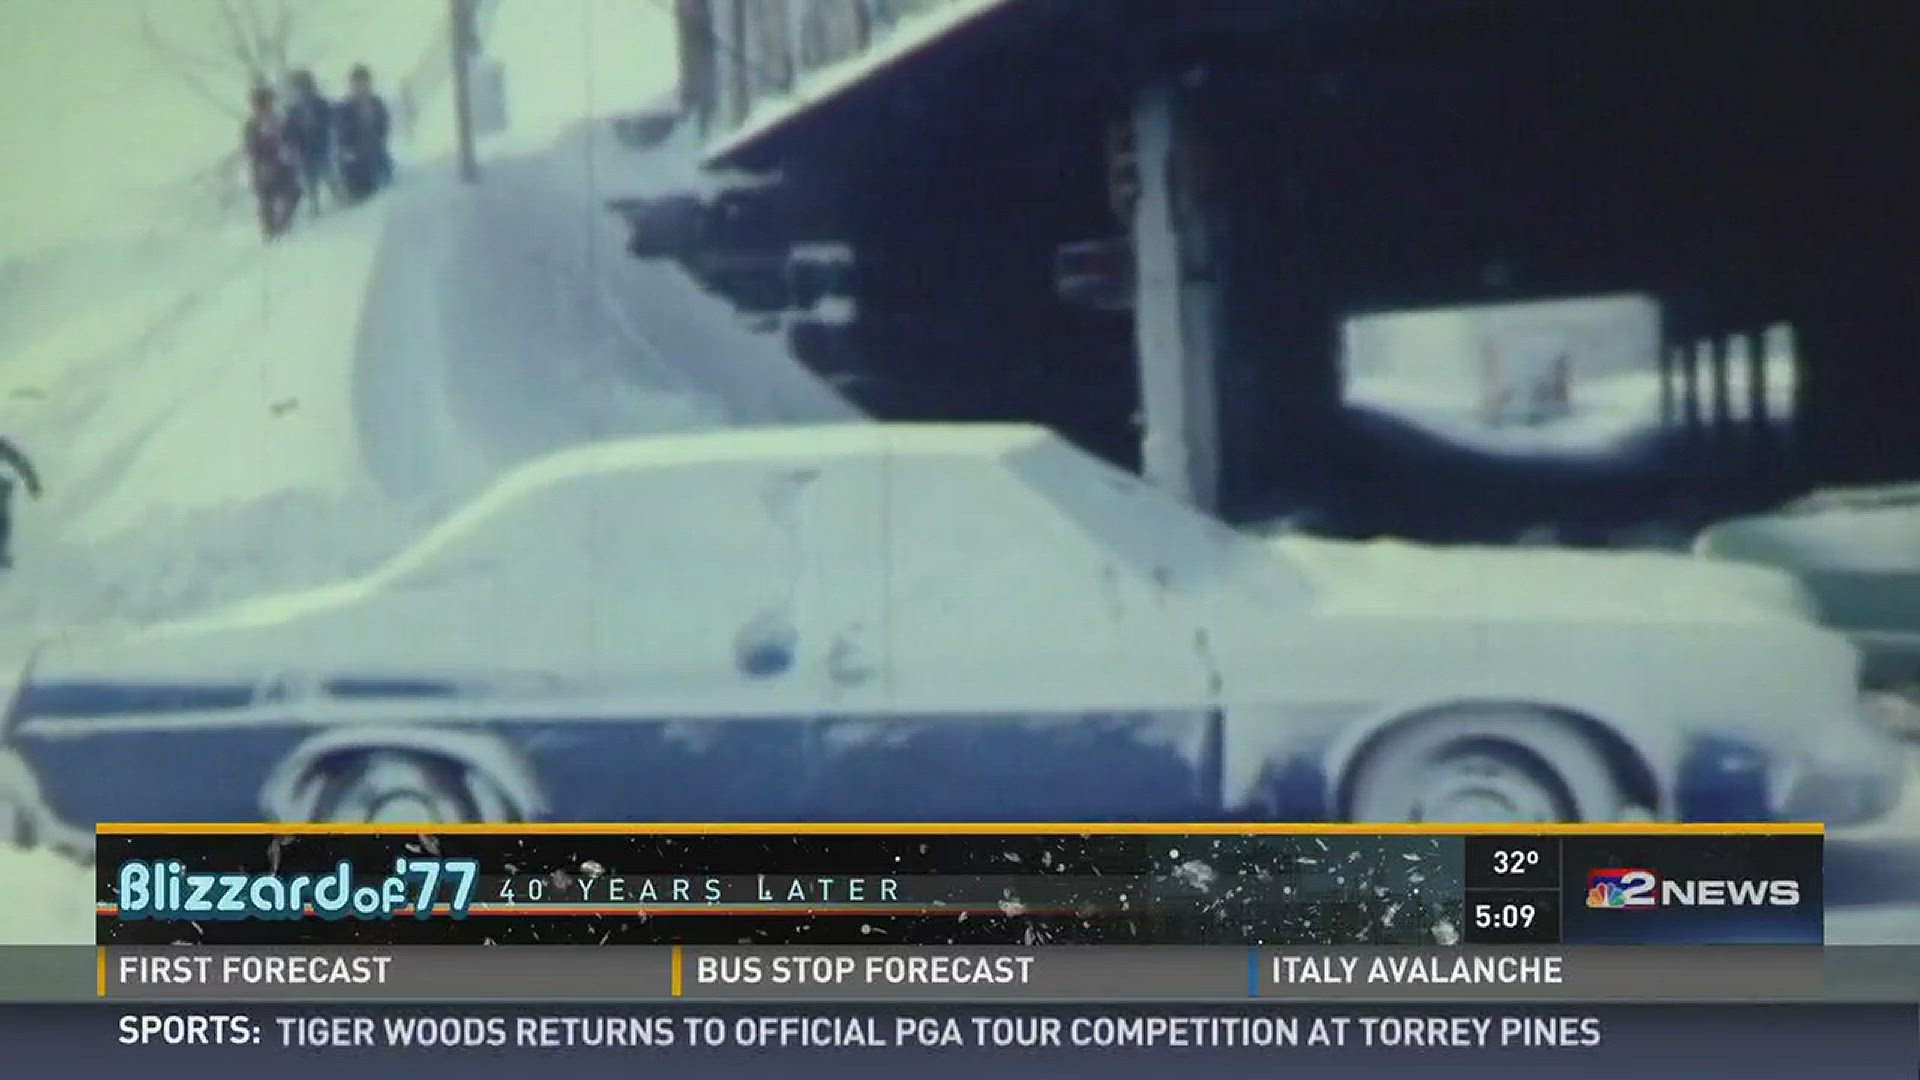 2017 marks the 40th Anniversary of the Blizzard of '77. Daybreak begins taking a look back to that fateful storm.